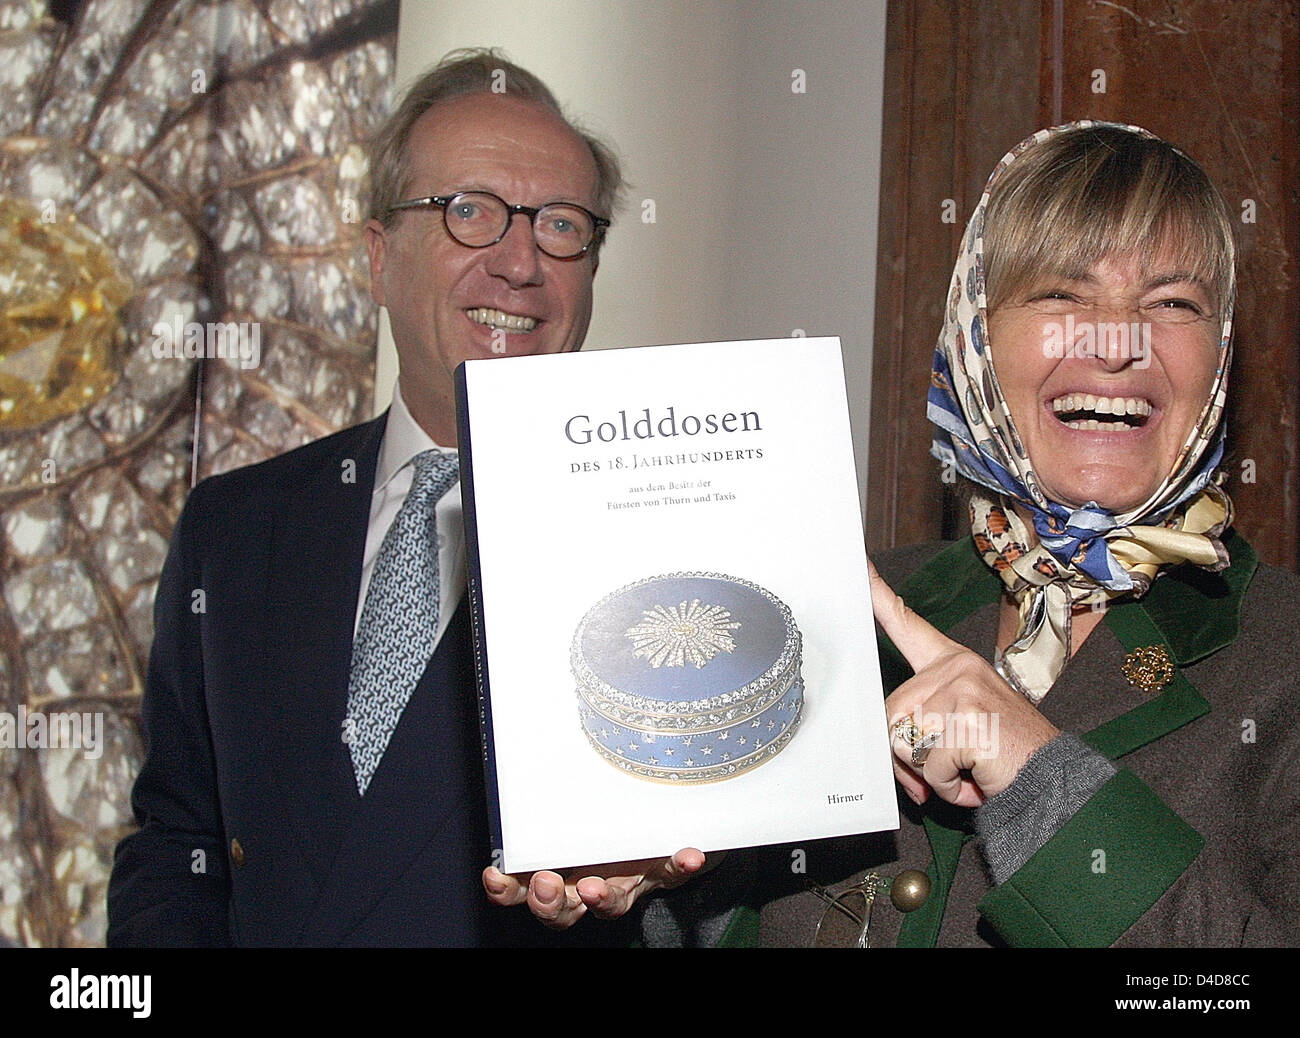 Princess Gloria von Thurn und Taxis and Graf Heinrich von Spreti, President of Sotheby's Germany, present the exhibition catalogue of a special exhibtion on golden tins from the 18th century at the 'Nationalmuseum' in Munich, Germany, 1 April 2008. The special exhibition 'Galante Preziosen des Fuersten von Thurn und Taxis' features former 'Thurn und Taxis' family jewellery. Photo:  Stock Photo